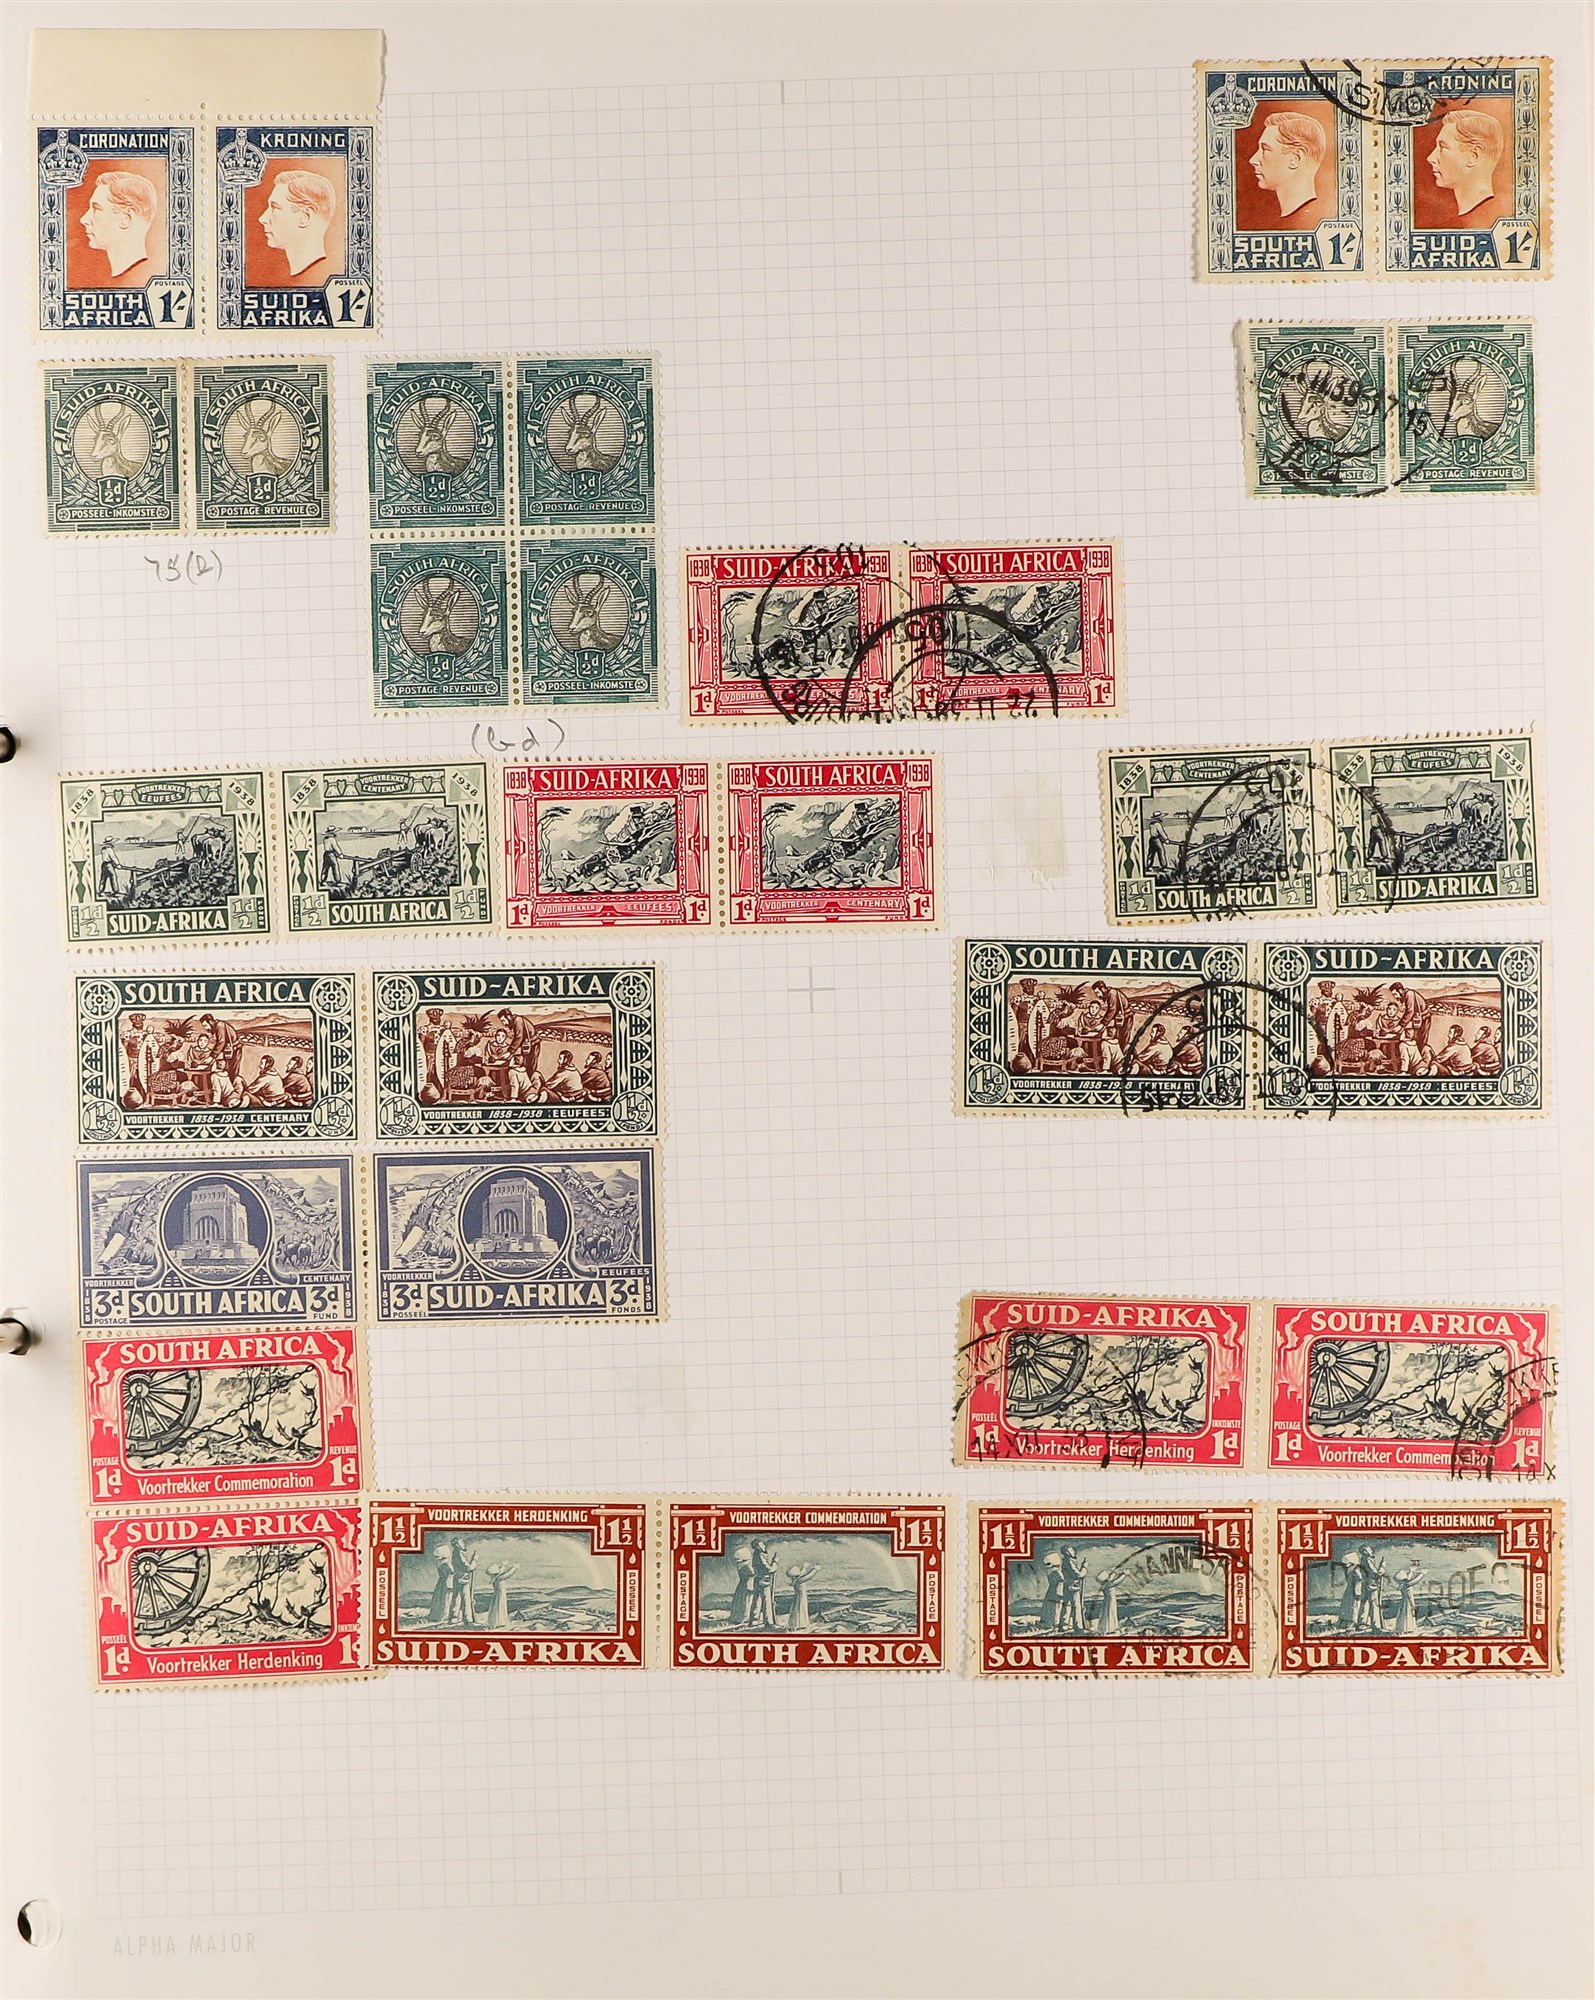 SOUTH AFRICA 1910 - 2010 COLLECTION of mint & used stamps in album, many high values, sets (2200+ - Image 7 of 17